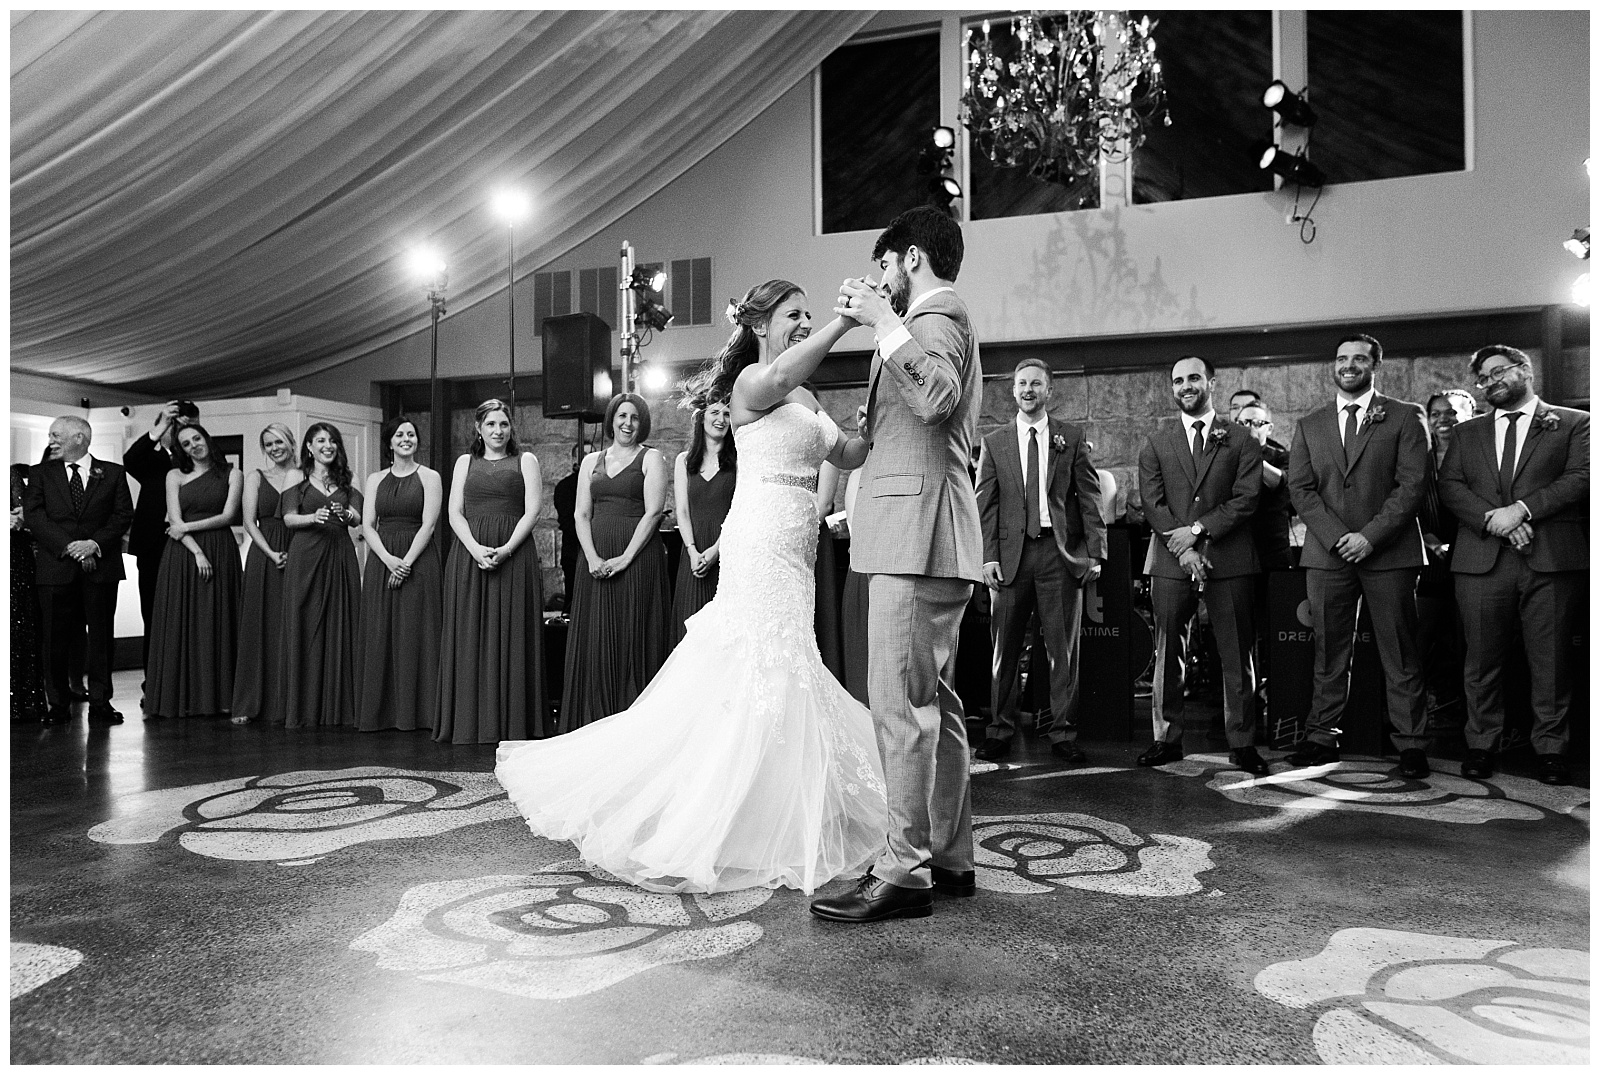 Black and white photo of the groom twirling the bride on the dance floor at the Lake House Inn wedding venue.